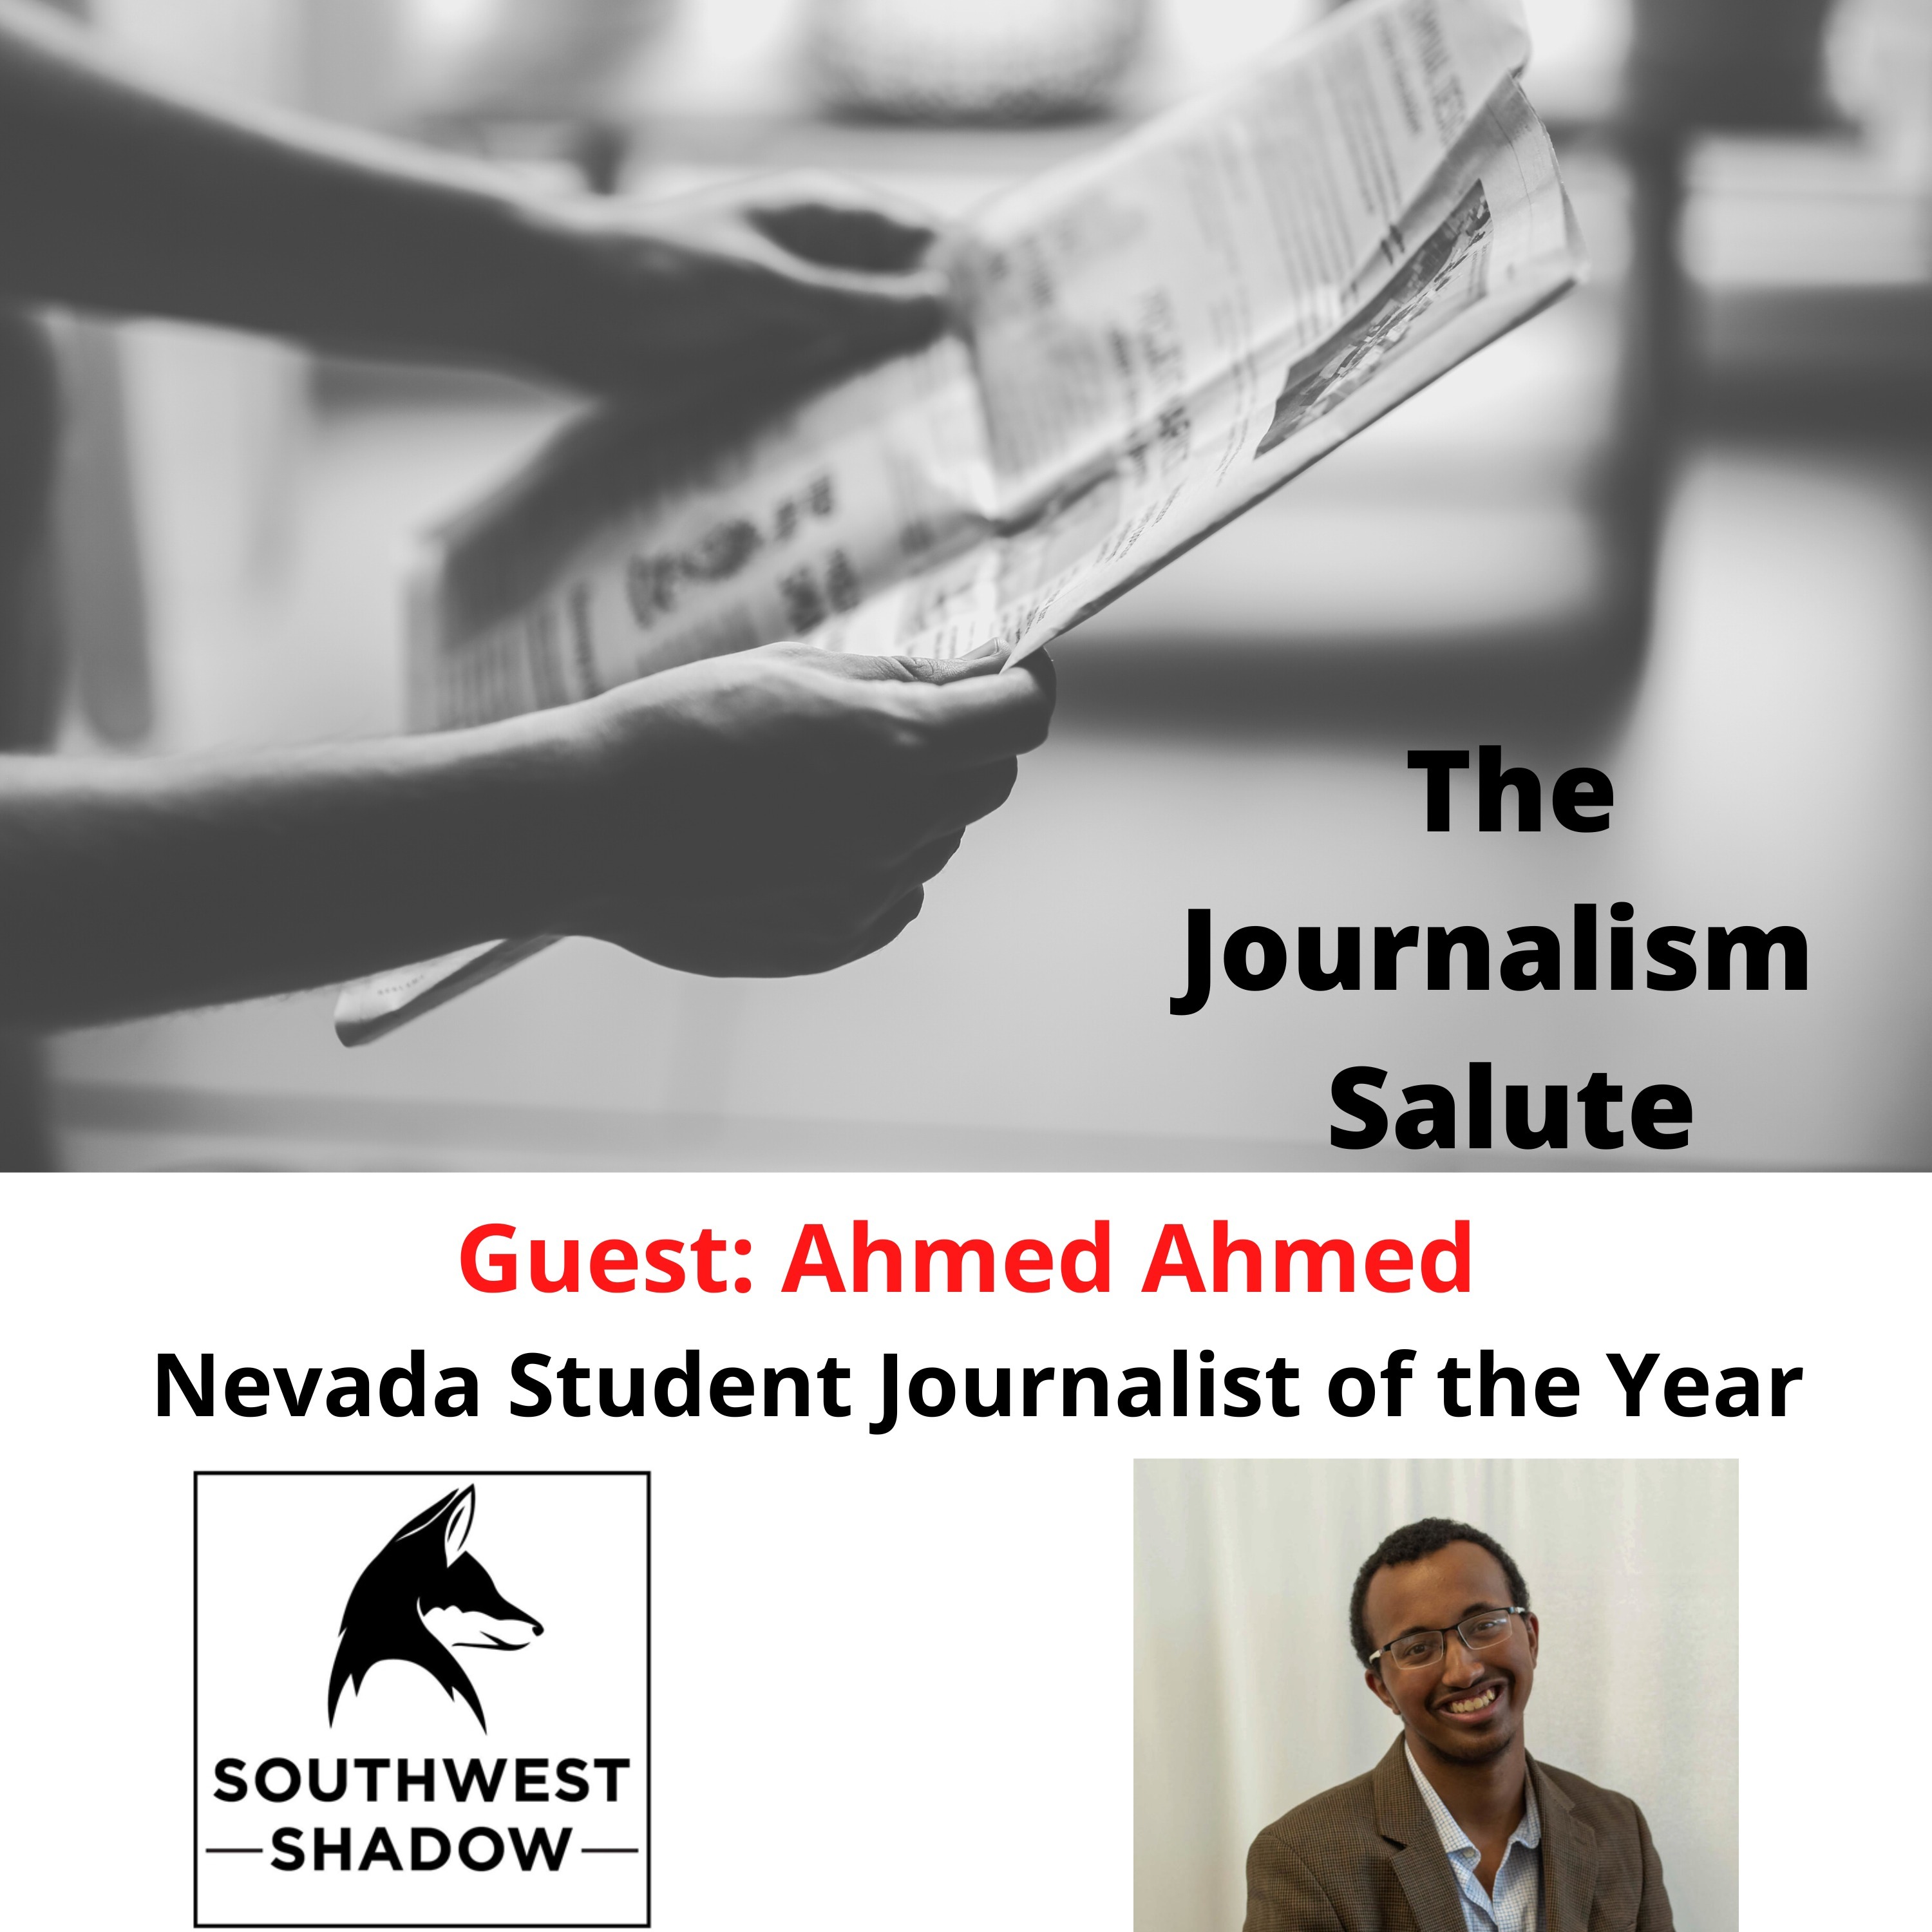 Ahmed Ahmed, Nevada Student Journalist of the Year